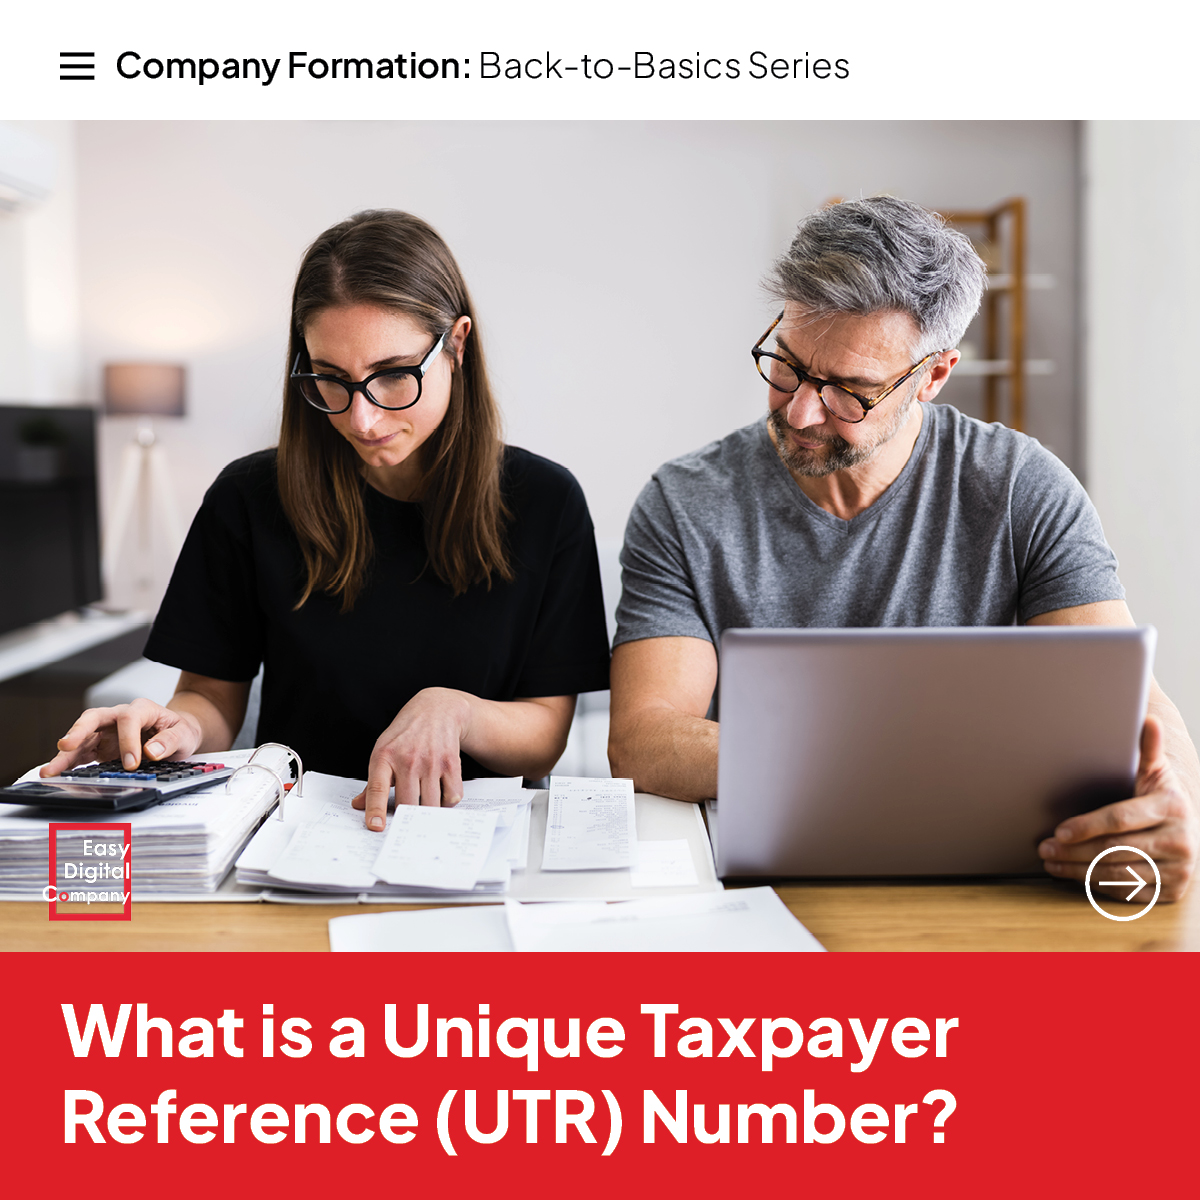 Have you seen our #companyformation back-to-basics series? Dive into these 4!

Company's Incorporation Date
1⃣ rb.gy/48kc8x
What is a Company Director?
2⃣ rb.gy/cuj2oz
Informing HMRC
3⃣ rb.gy/7bqw38
What is a UTR Number?
4⃣ rb.gy/mffjp0